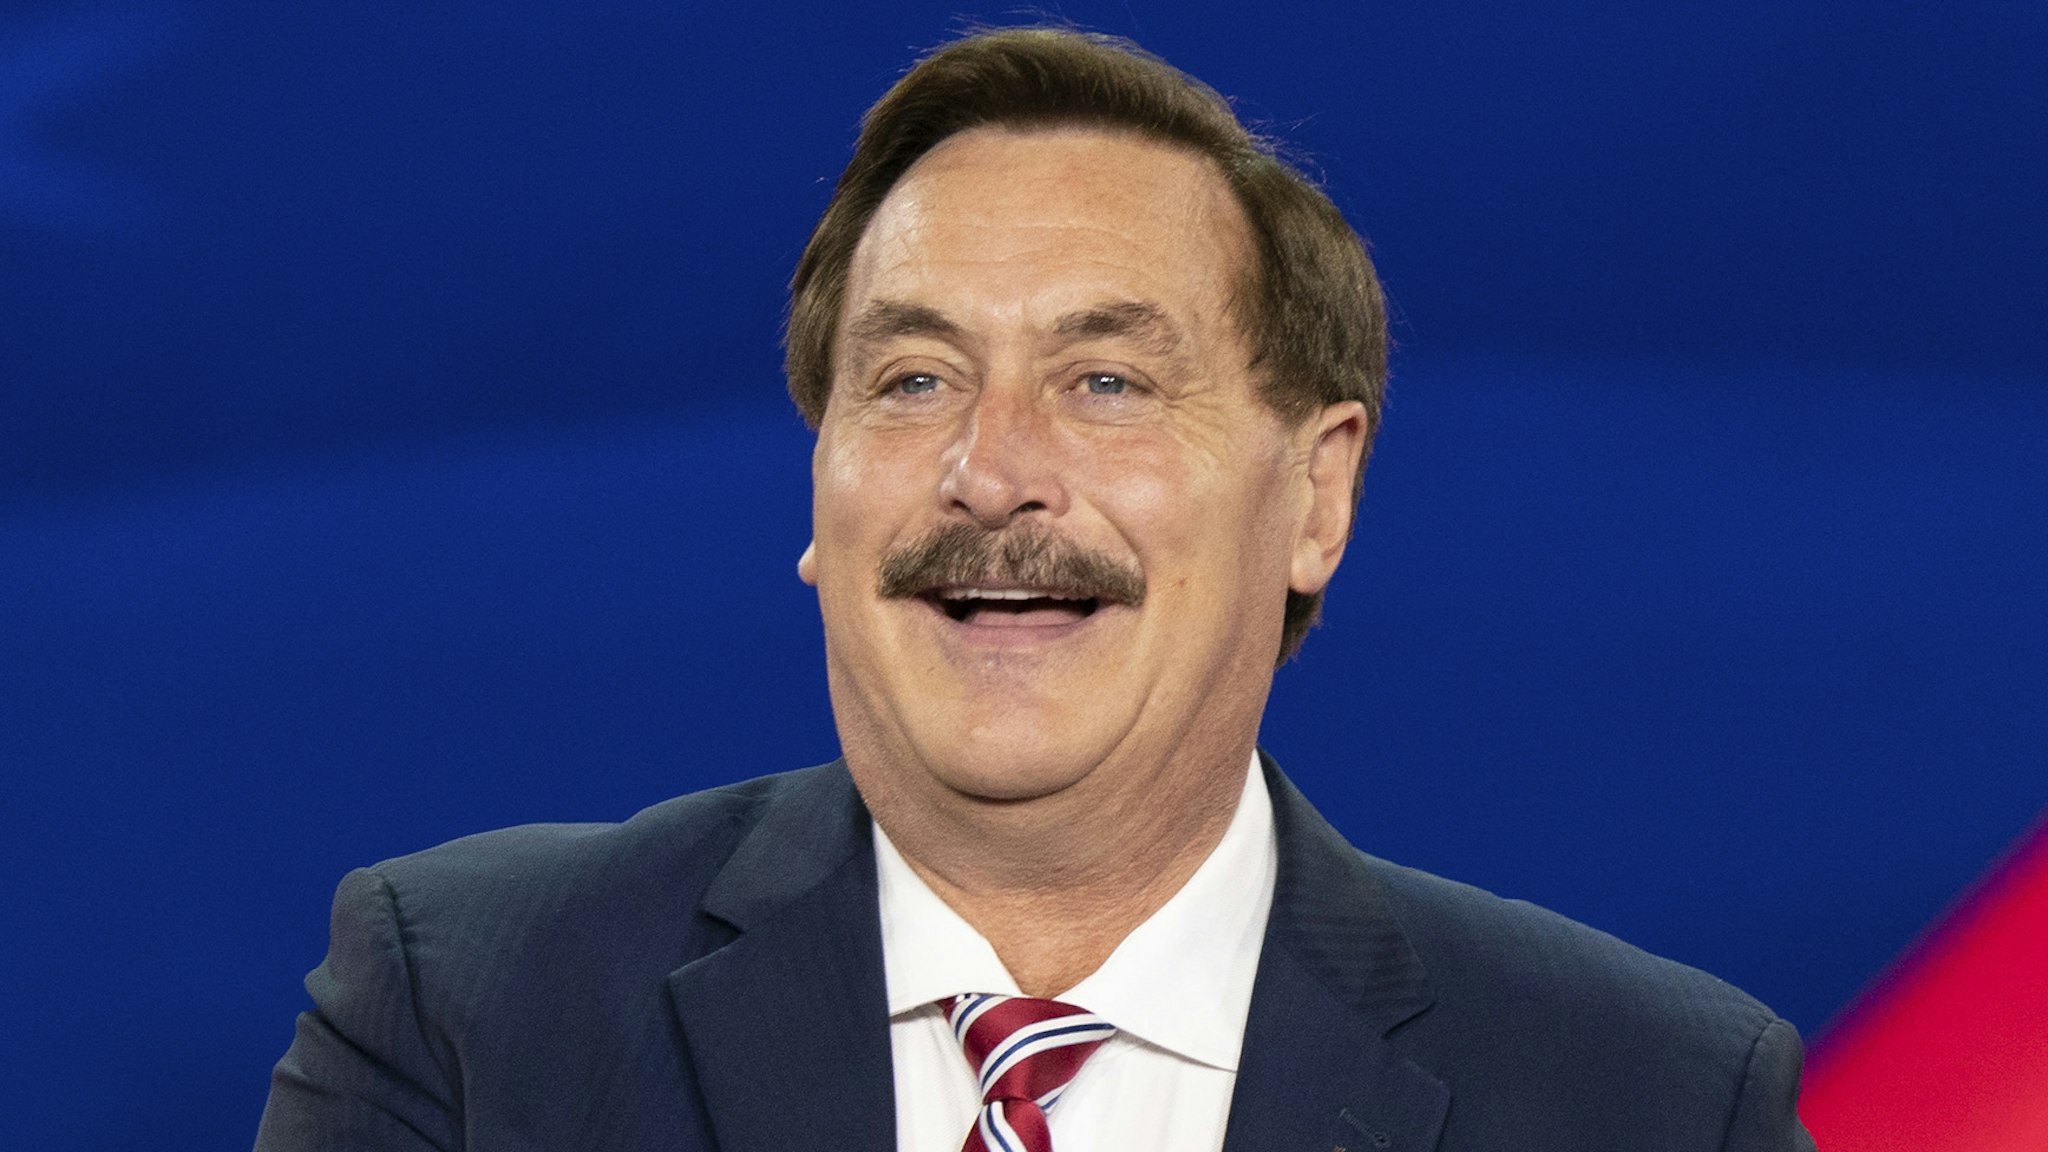 DALLAS, TEXAS, UNITED STATES - 2022/08/05: Political activist Mike Lindell speaks during CPAC (Conservative Political Action Conference) Texas 2022 conference at Hilton Anatole.